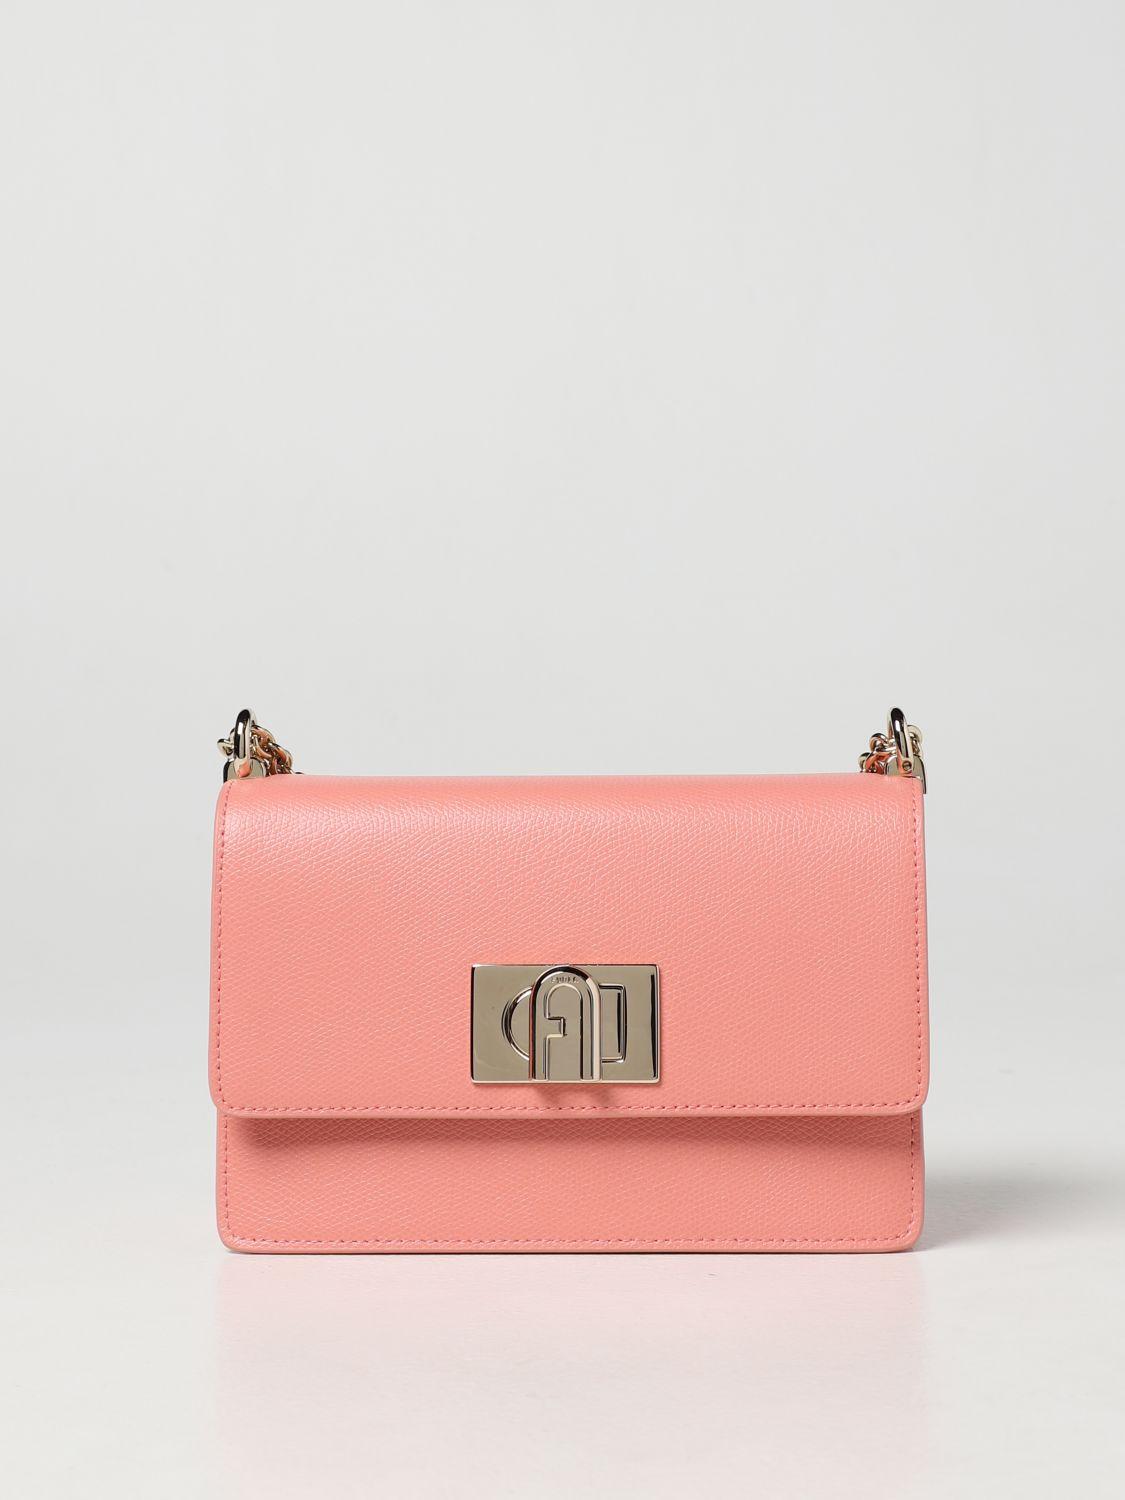 Furla 1927 Bag In Micro-grained Leather in Pink